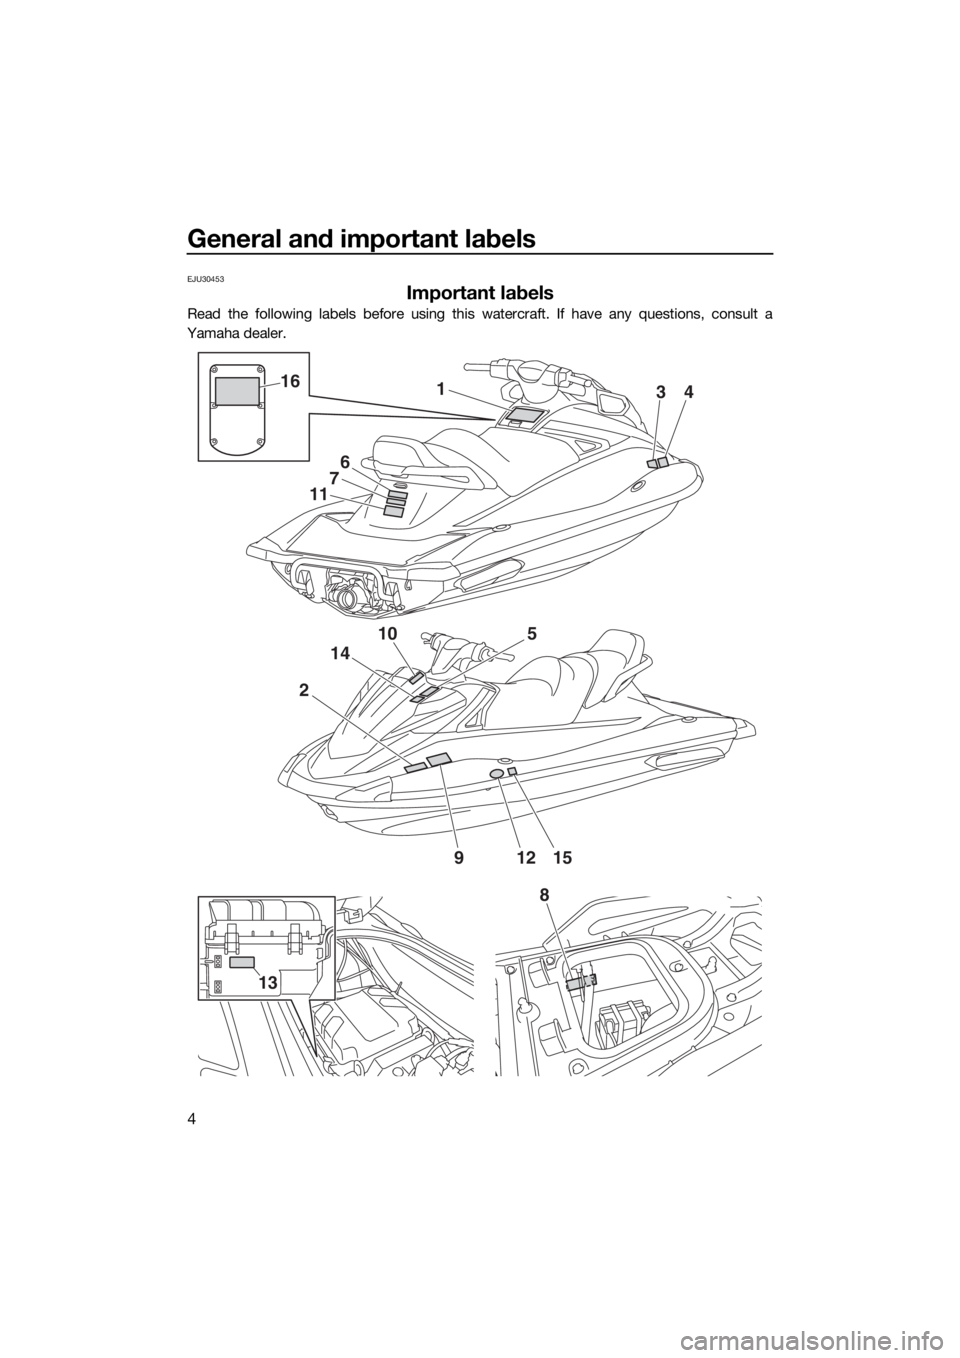 YAMAHA VX CRUISER 2018  Owners Manual General and important labels
4
EJU30453
Important labels
Read the following labels before using this watercraft. If have any questions, consult a
Yamaha dealer.
2
10
14
1
6
7
11
34
5
91512
16
8
13
UF4